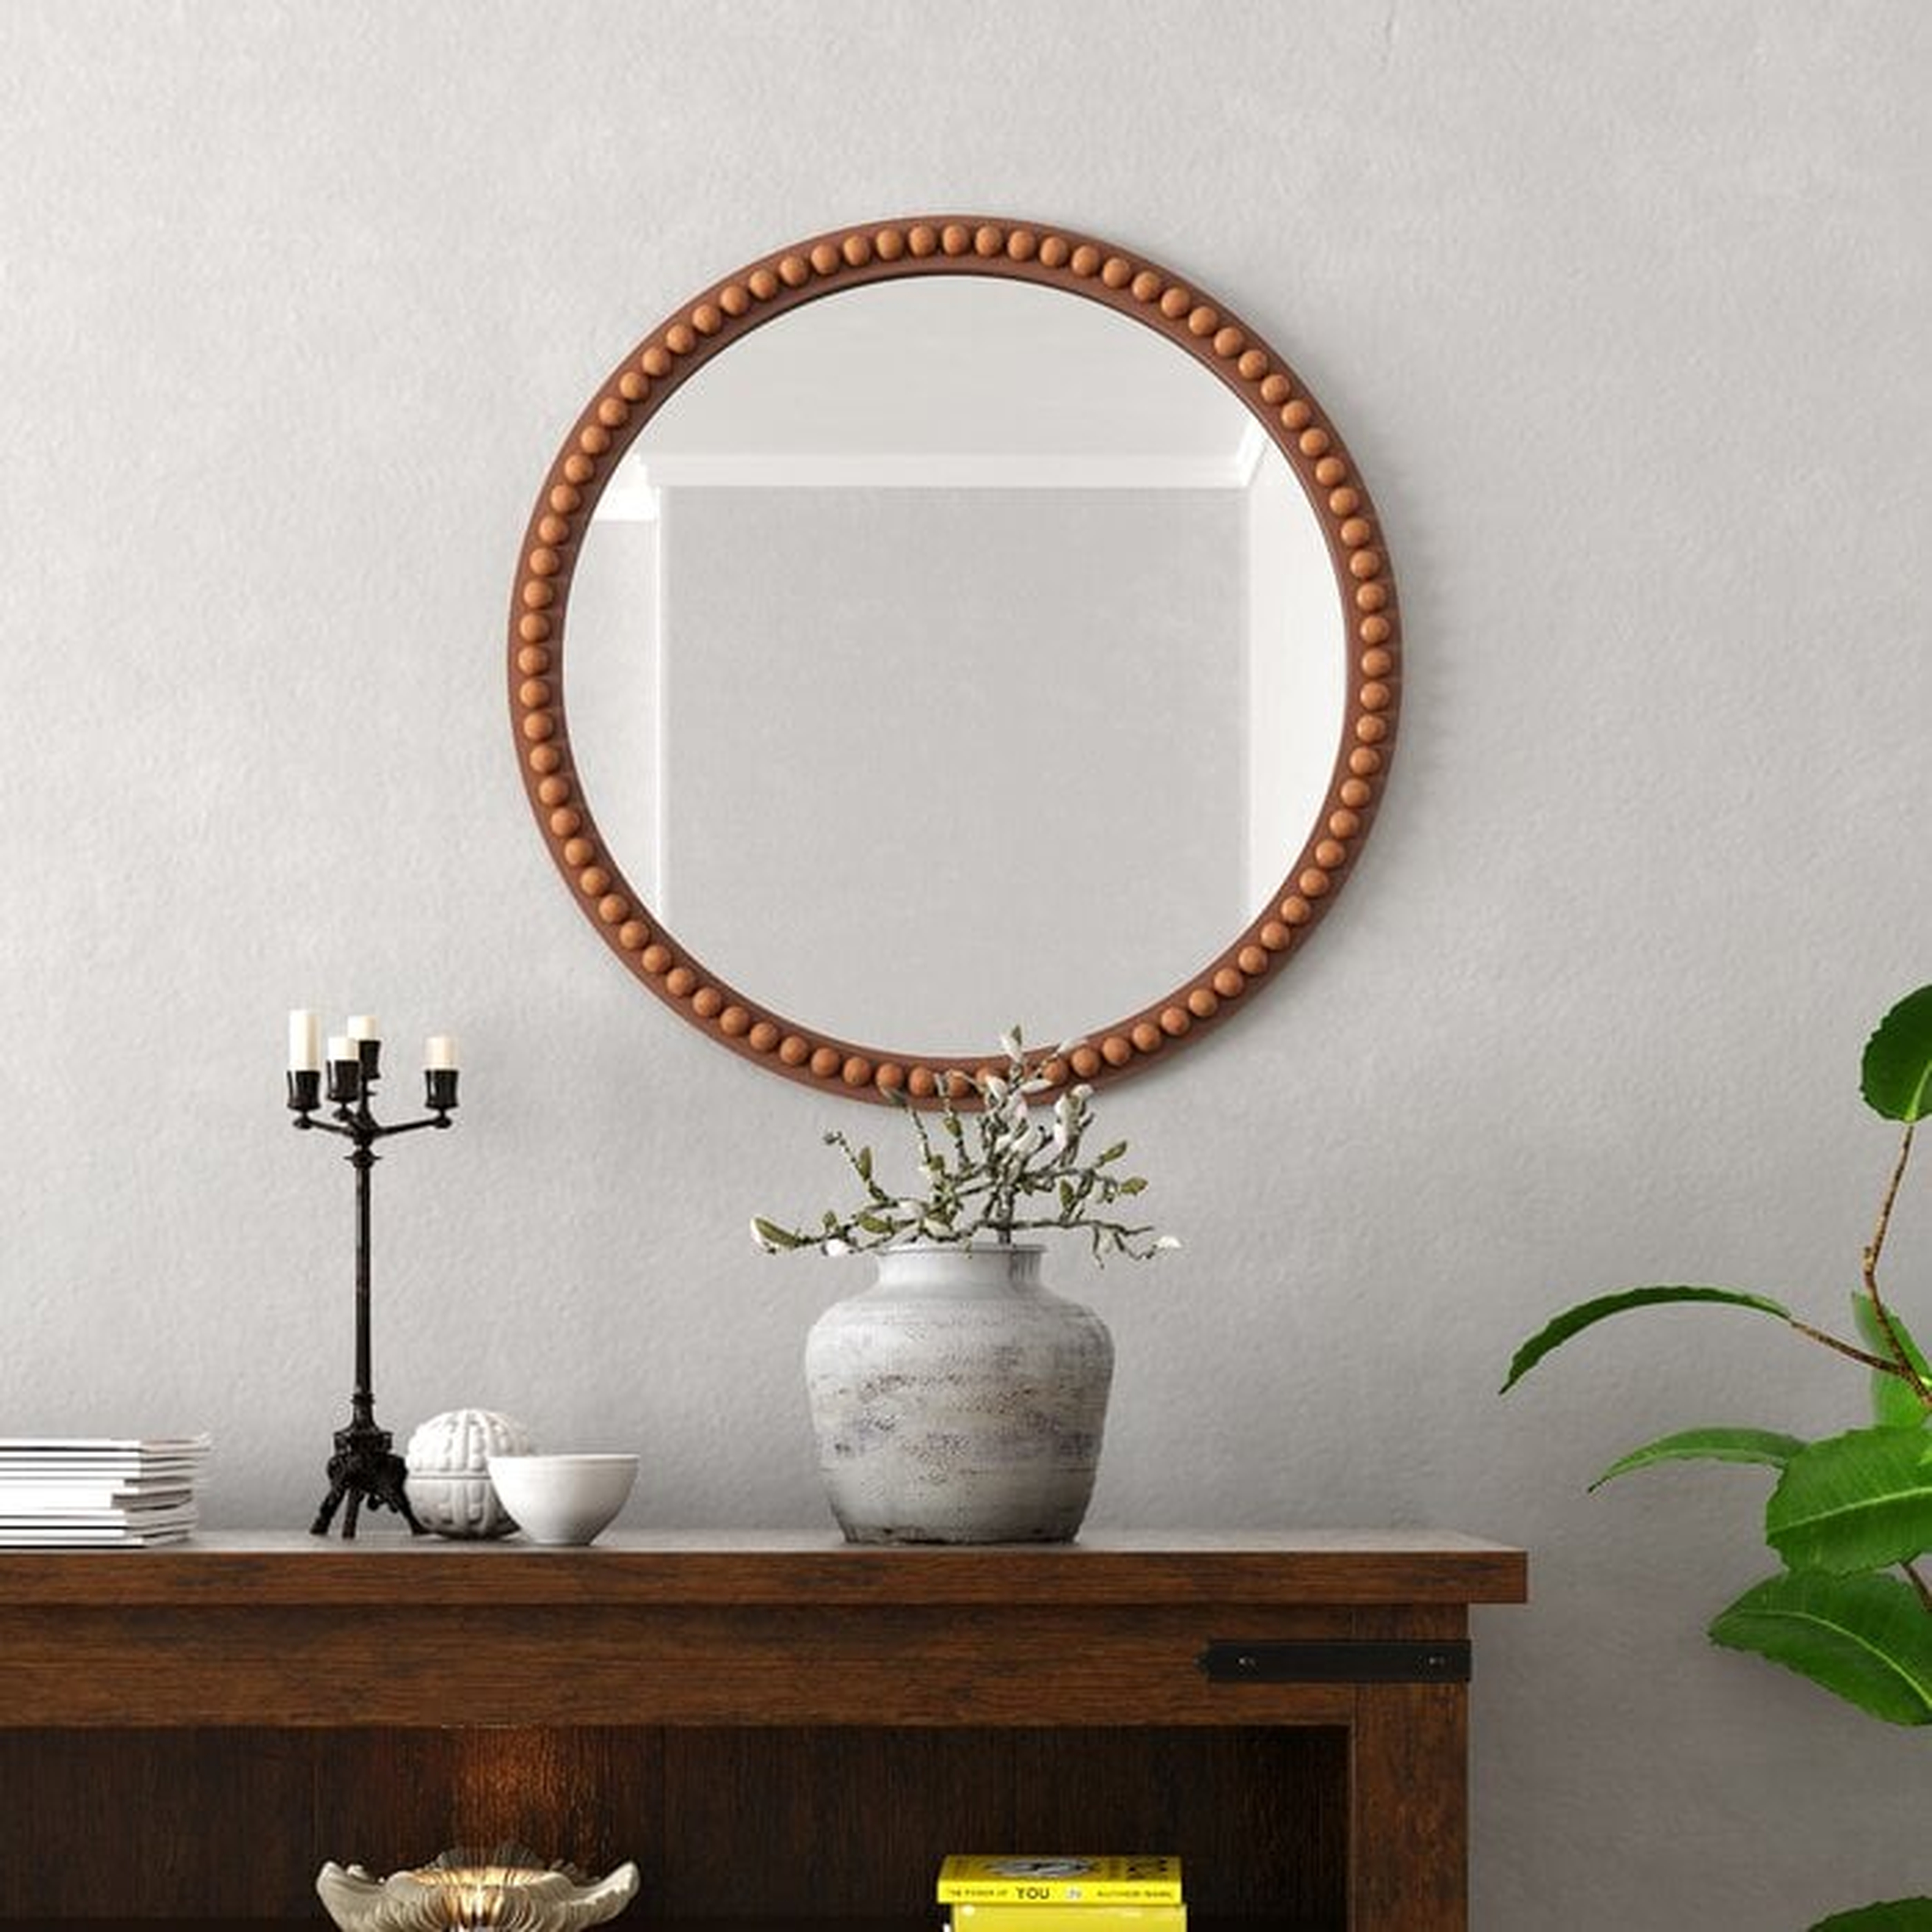 Aponi Round Wood Framed Wall Mounted Accent Mirror in Brown - Wayfair